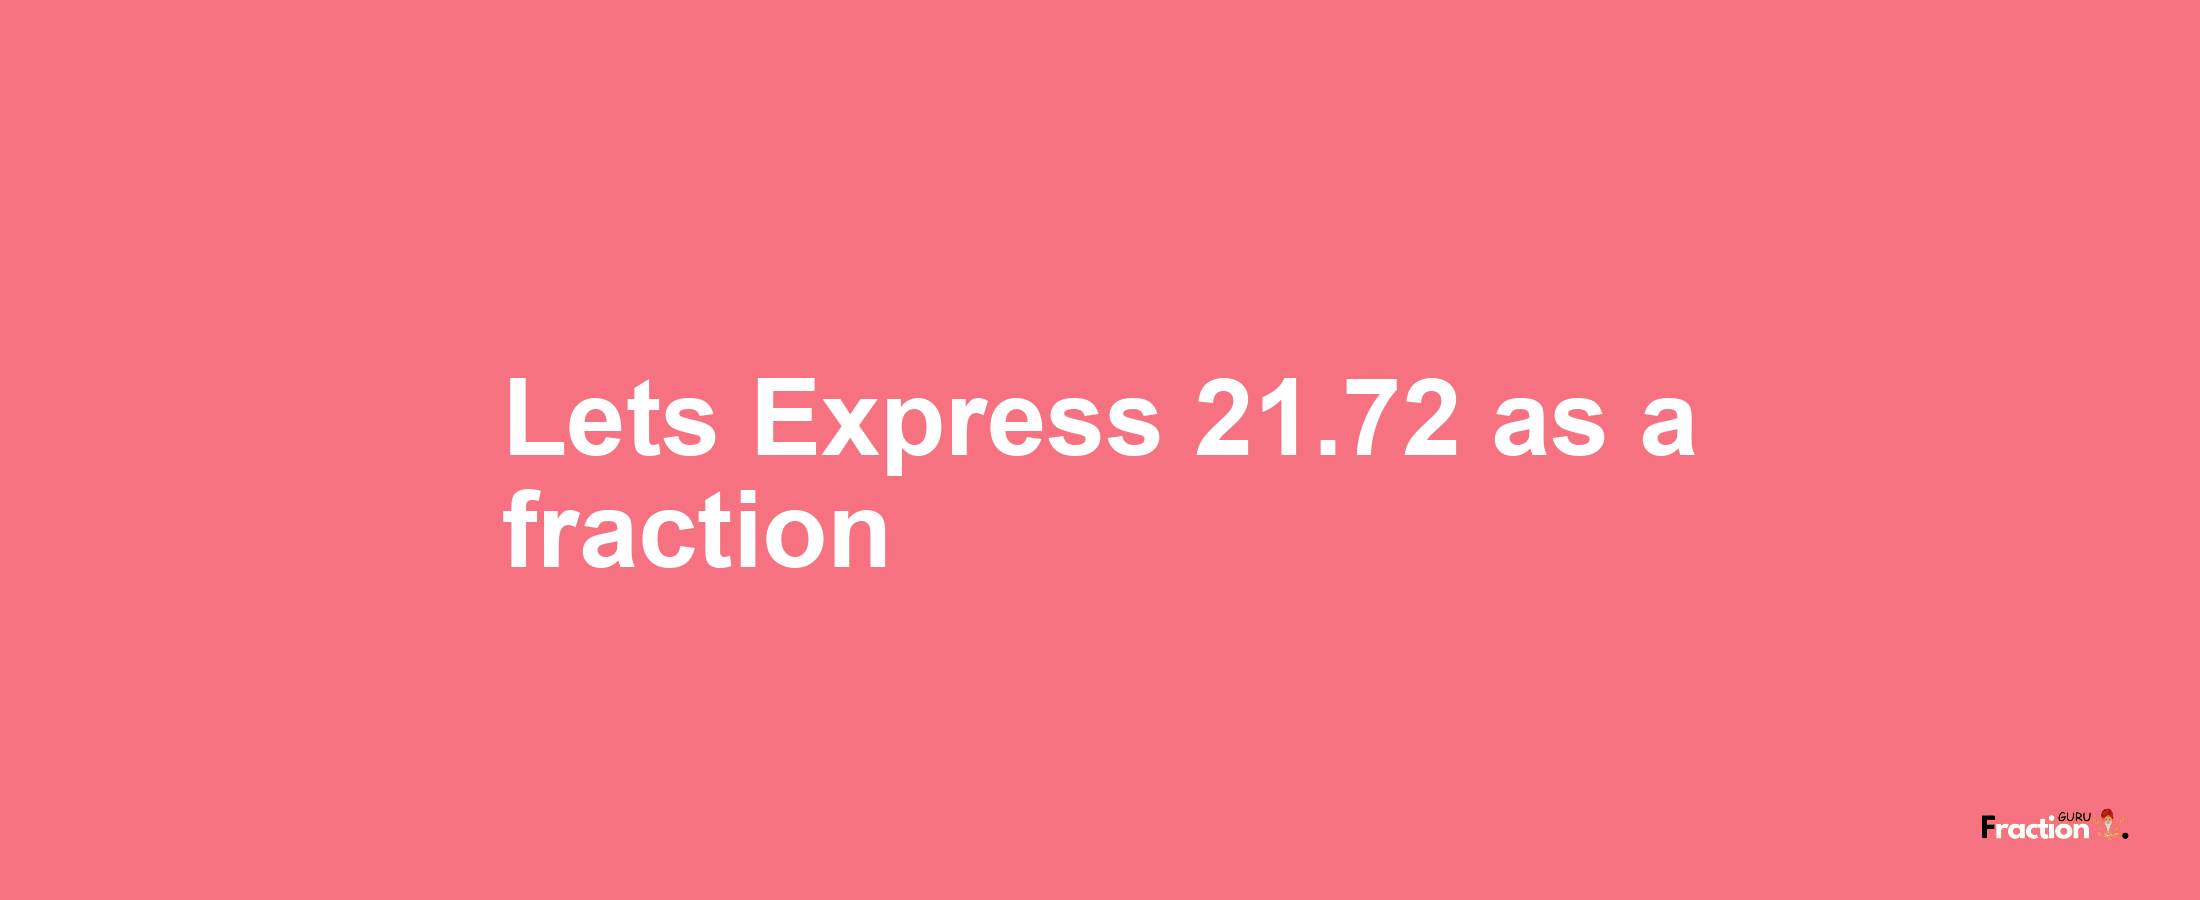 Lets Express 21.72 as afraction